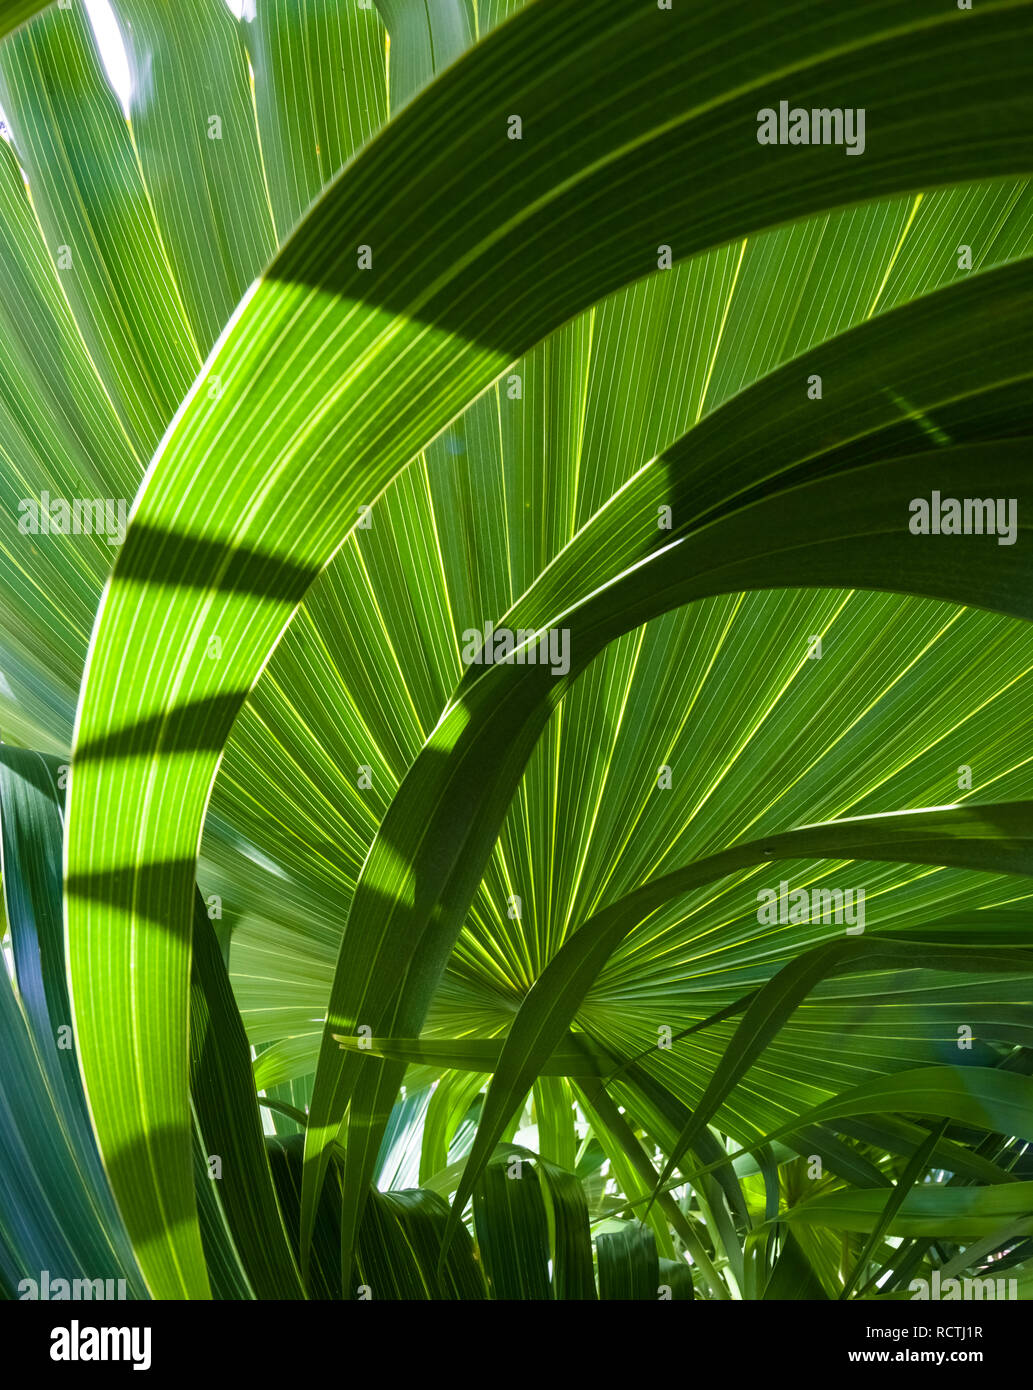 Closeup of green palm fronds Stock Photo